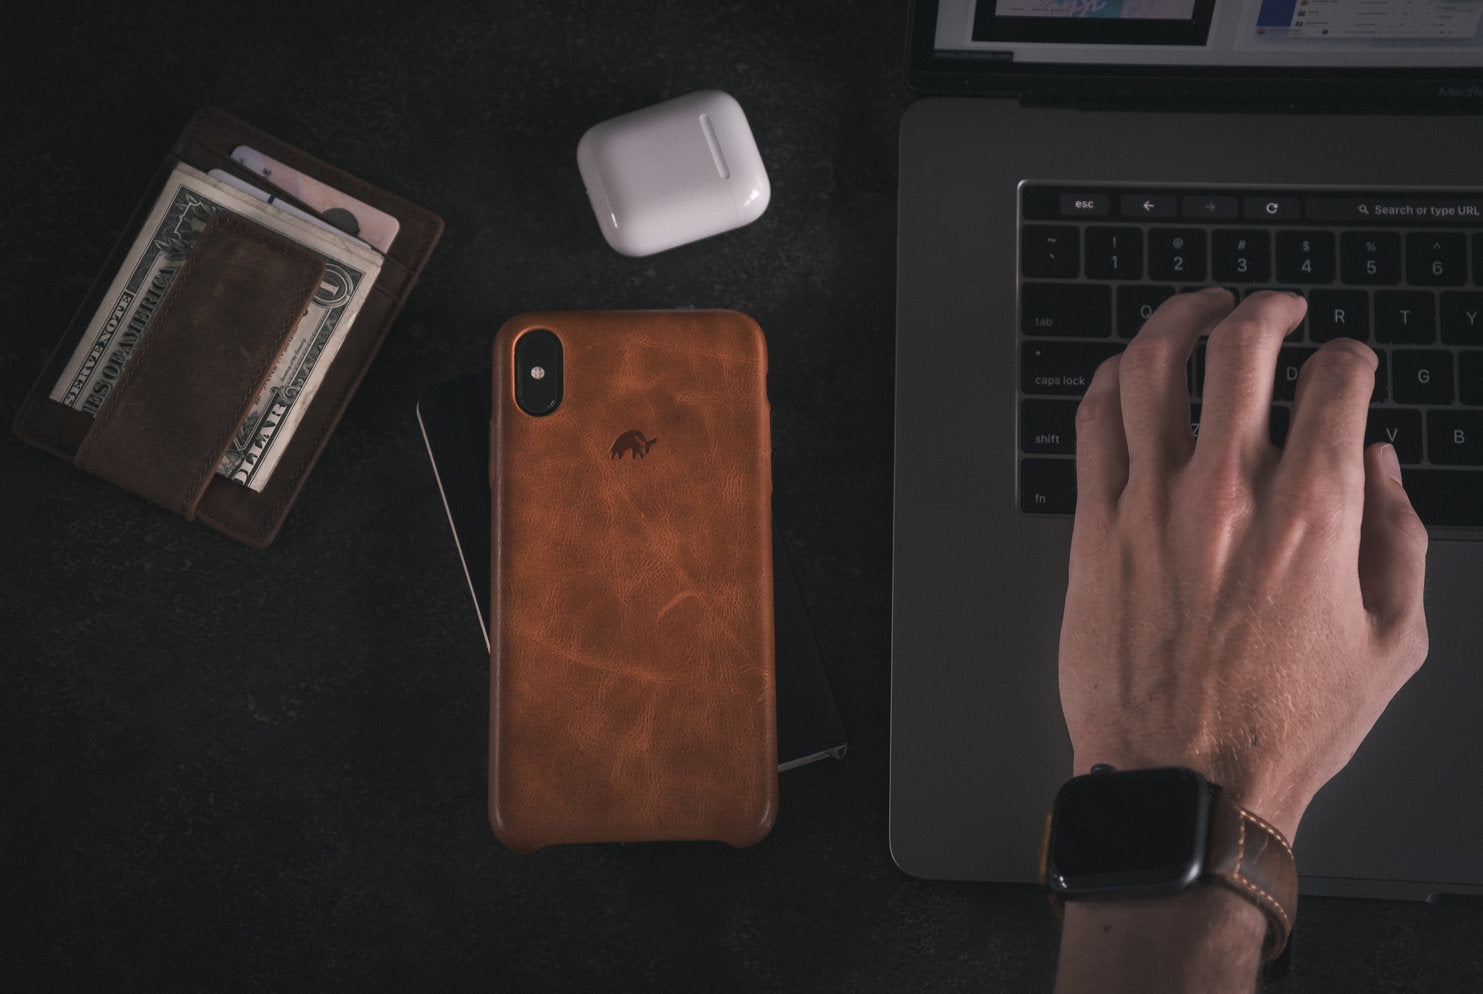 premium iphone case on table next to computer, wallet, and Apple Air Pods